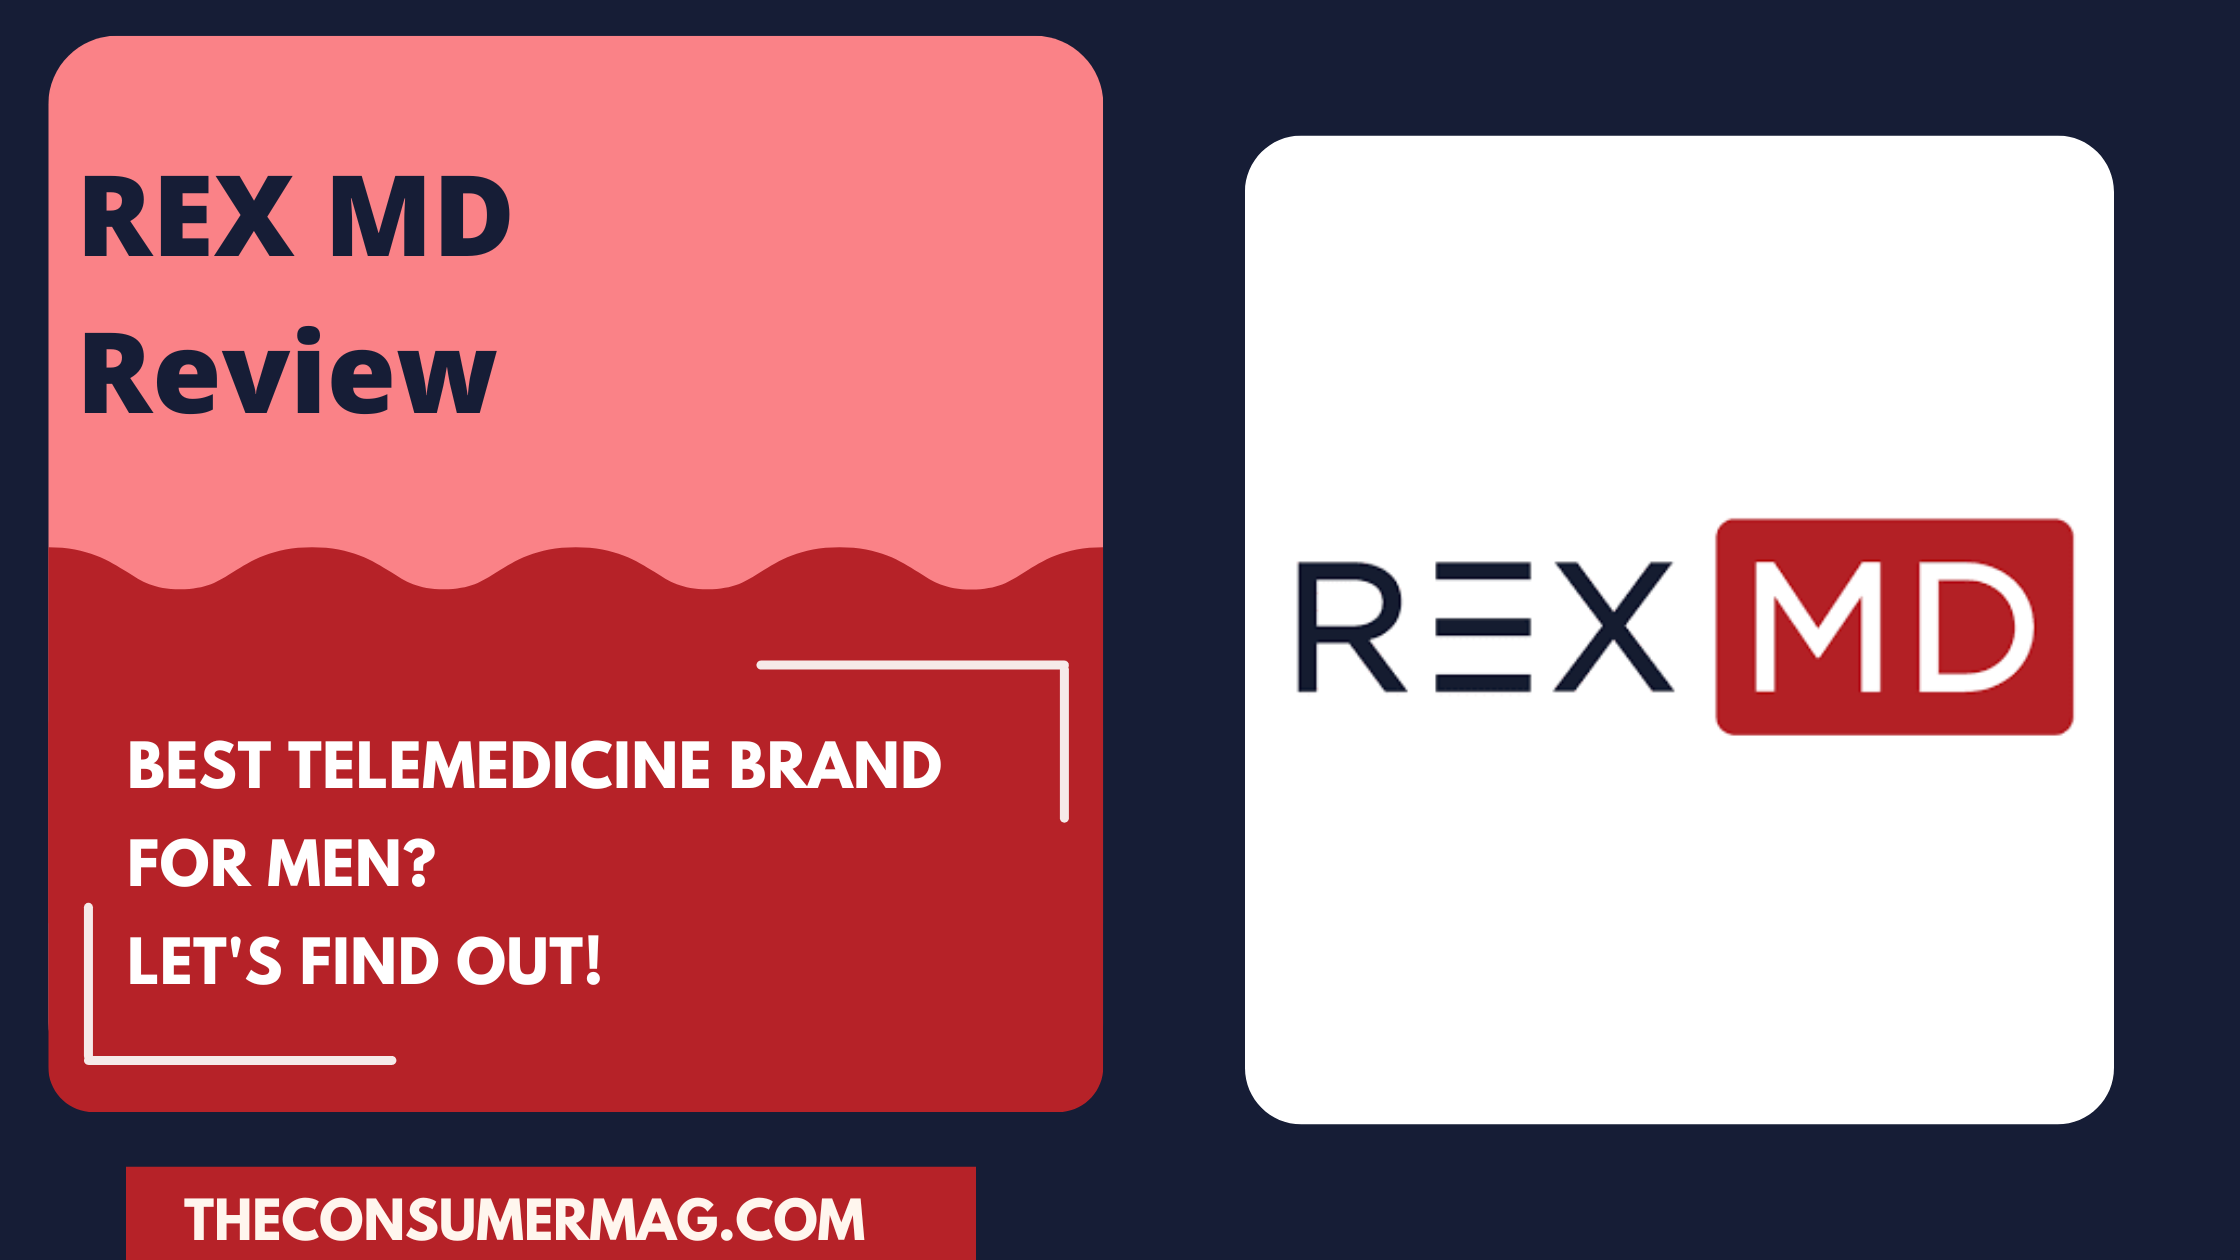 REX MD featured image